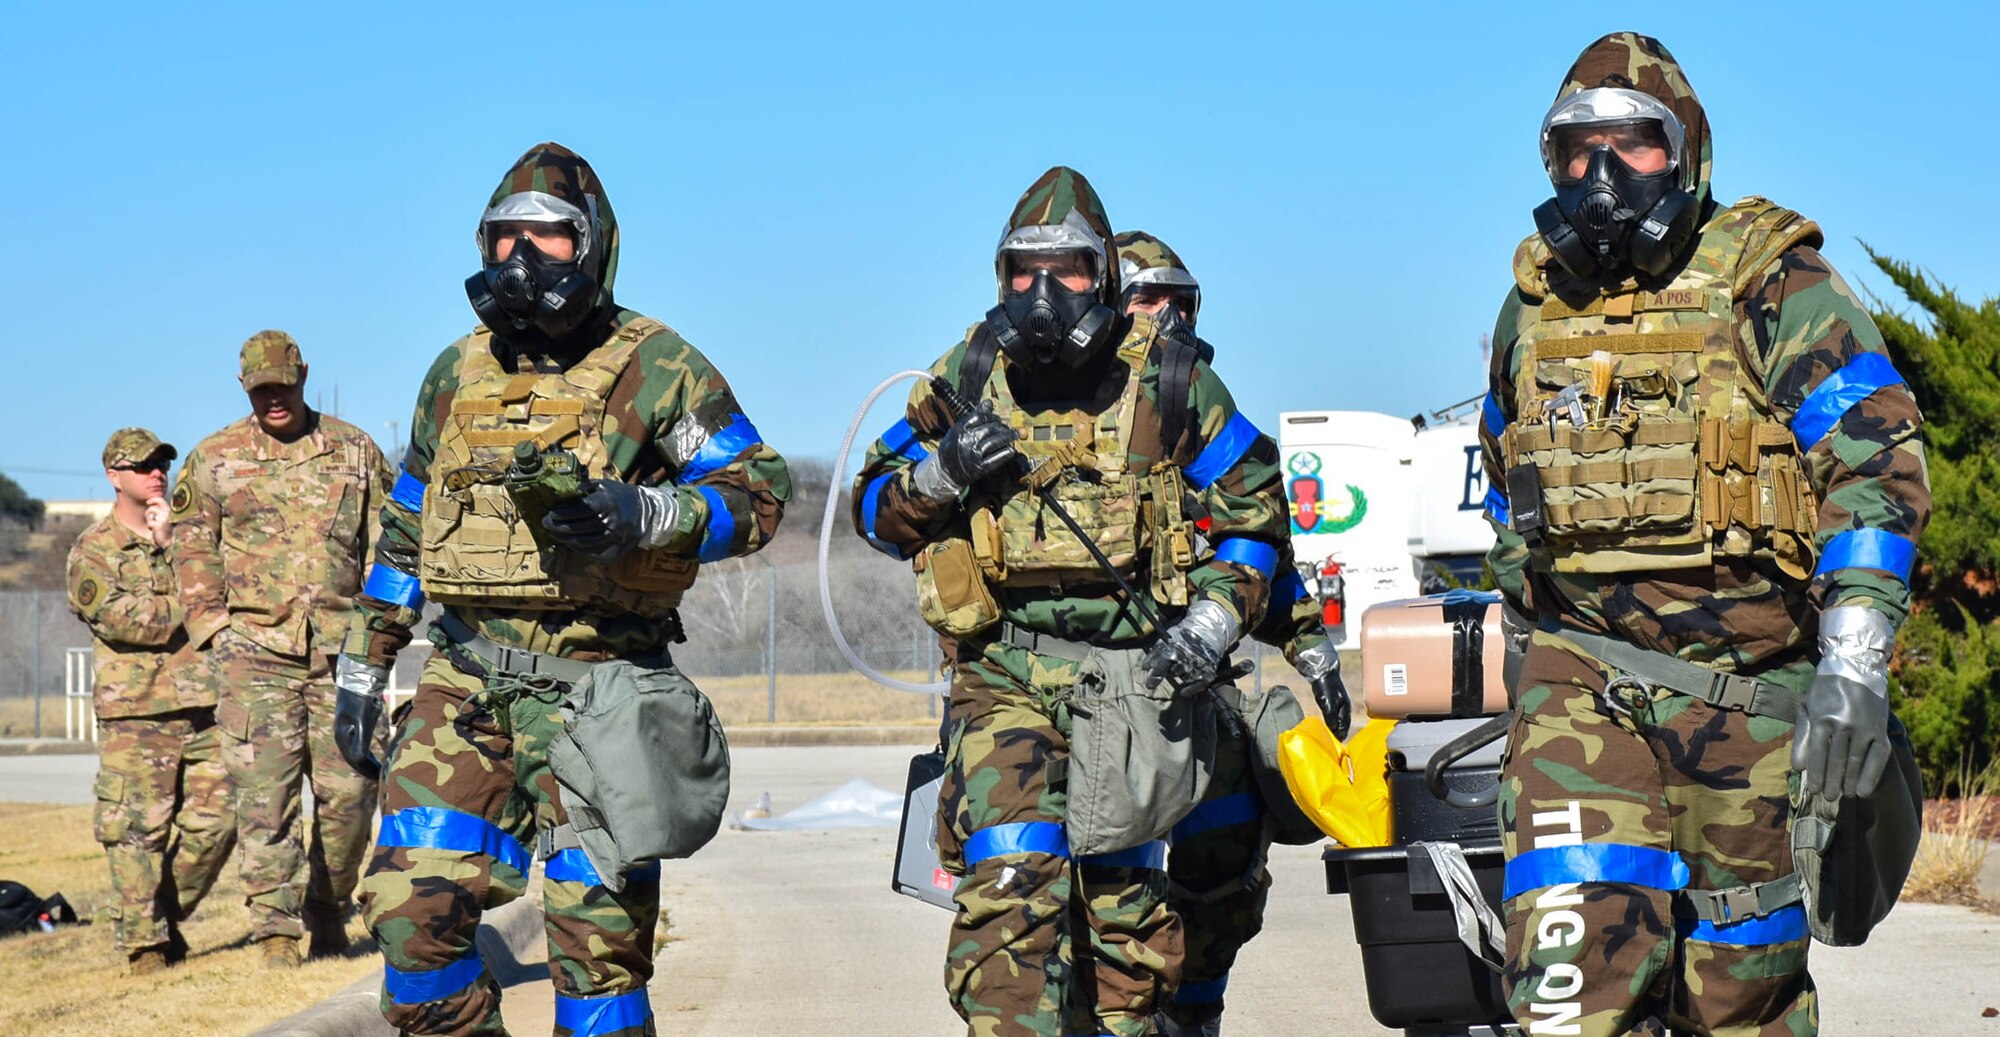 Explosive ordnance disposal technicians from the 433rd Civil Engineer Squadron walk towards a simulated unexploded ordnance site during an exercise at Joint Base San Antonio-Lackland, Texas, Feb. 9, 2022. (U.S. Air Force photo by Airman Mark Colmenares)